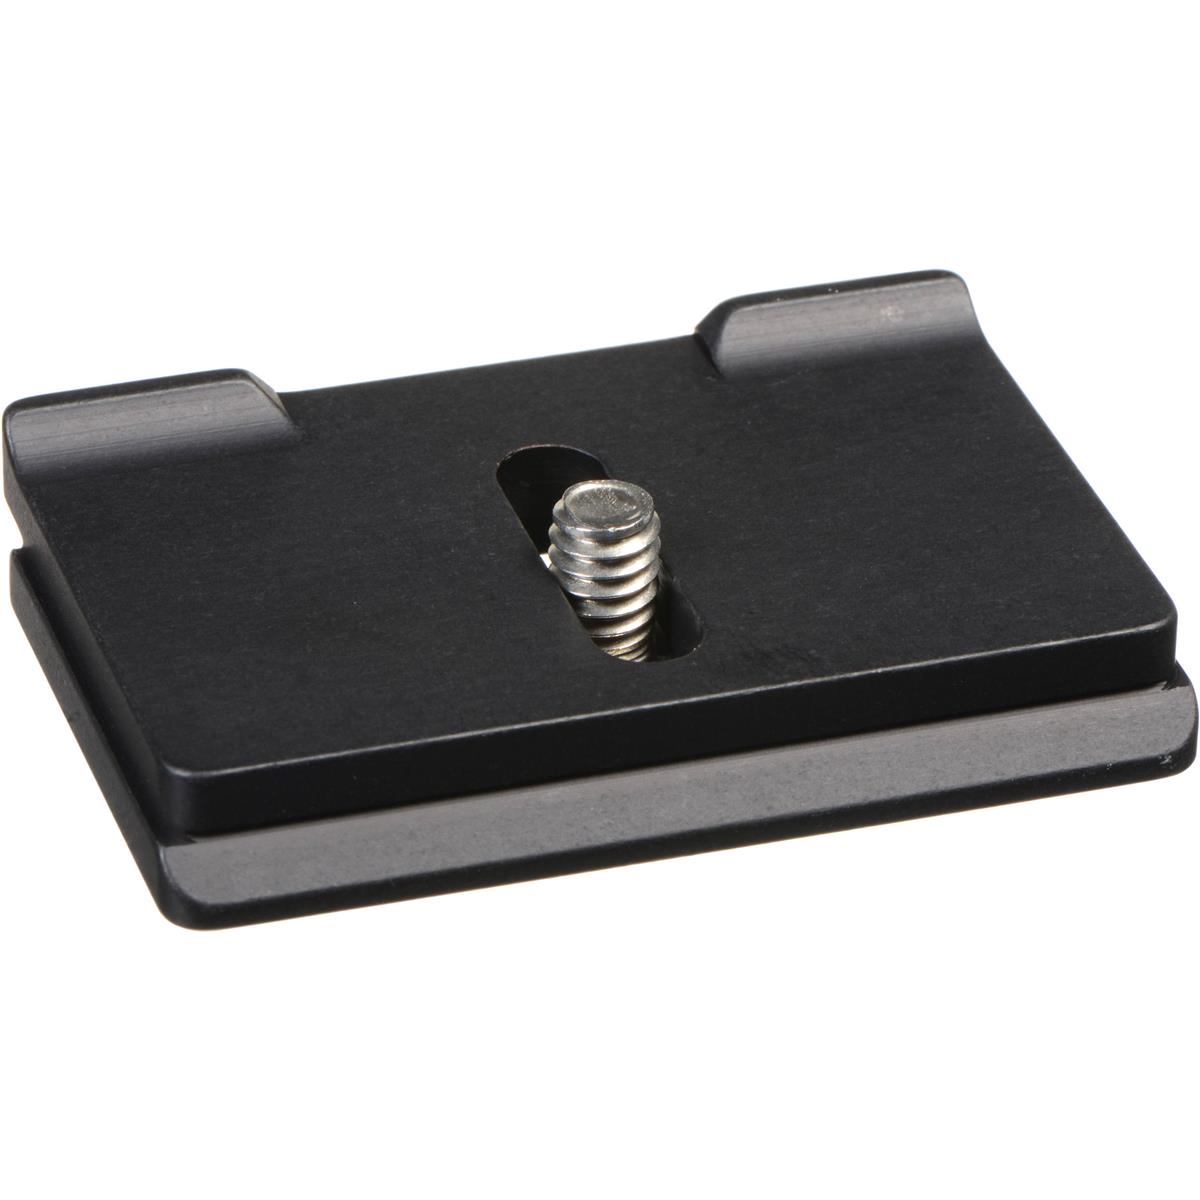 Image of Acratech Quick Release Plate for Nikon D750 Camera and Arca Swiss Type Clamp